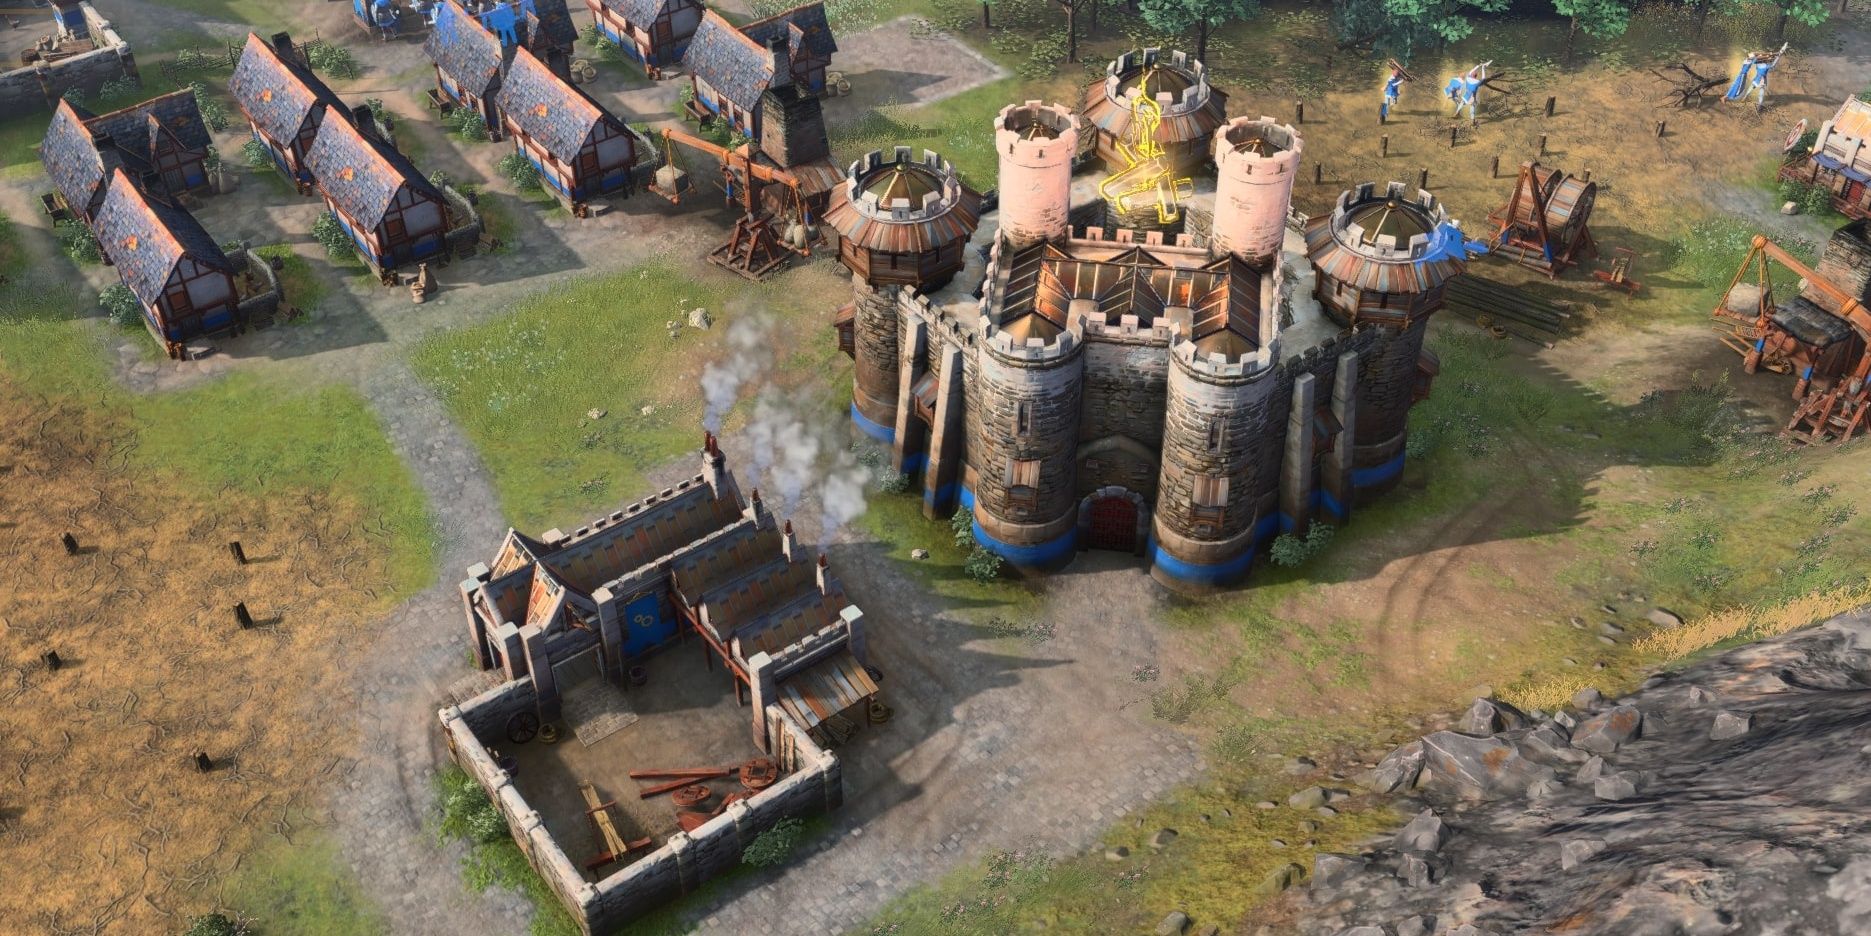 Keep in Age of Empires IV